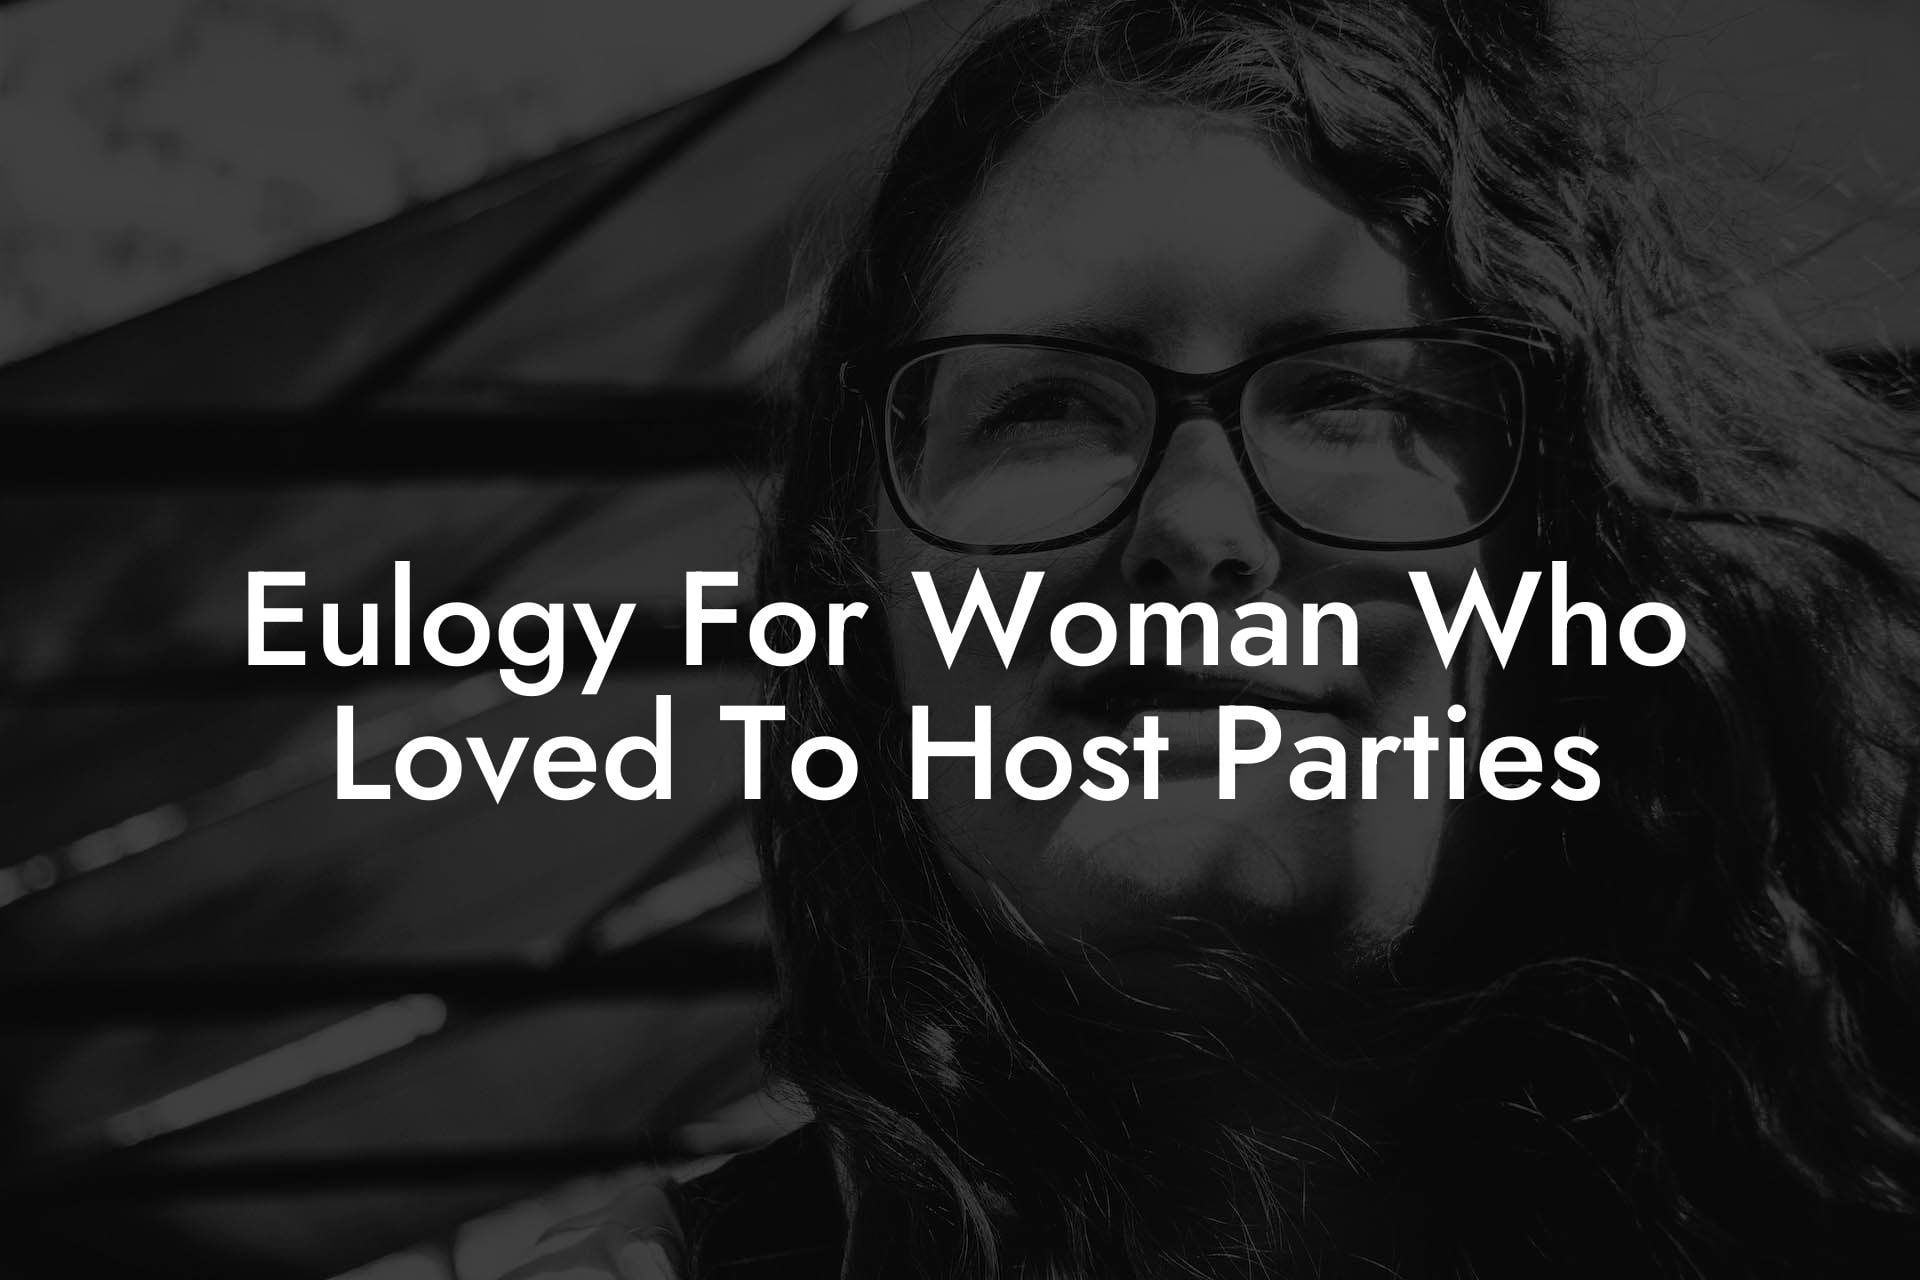 Eulogy For Woman Who Loved To Host Parties